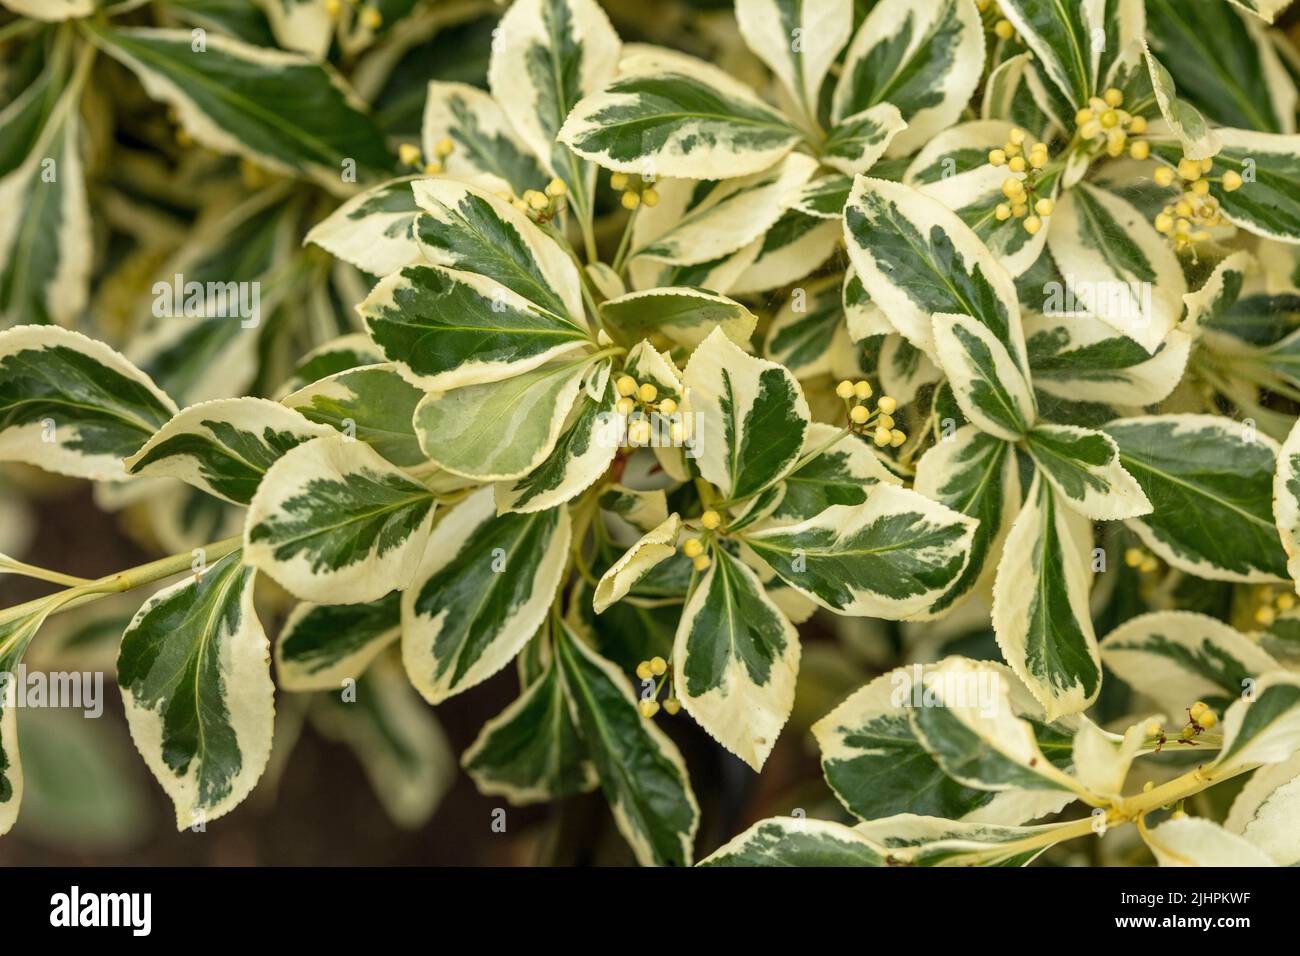 Abstractly patterned Euonymus Fortunei 'Silver Queen’, natural plant close-up portrait Stock Photo